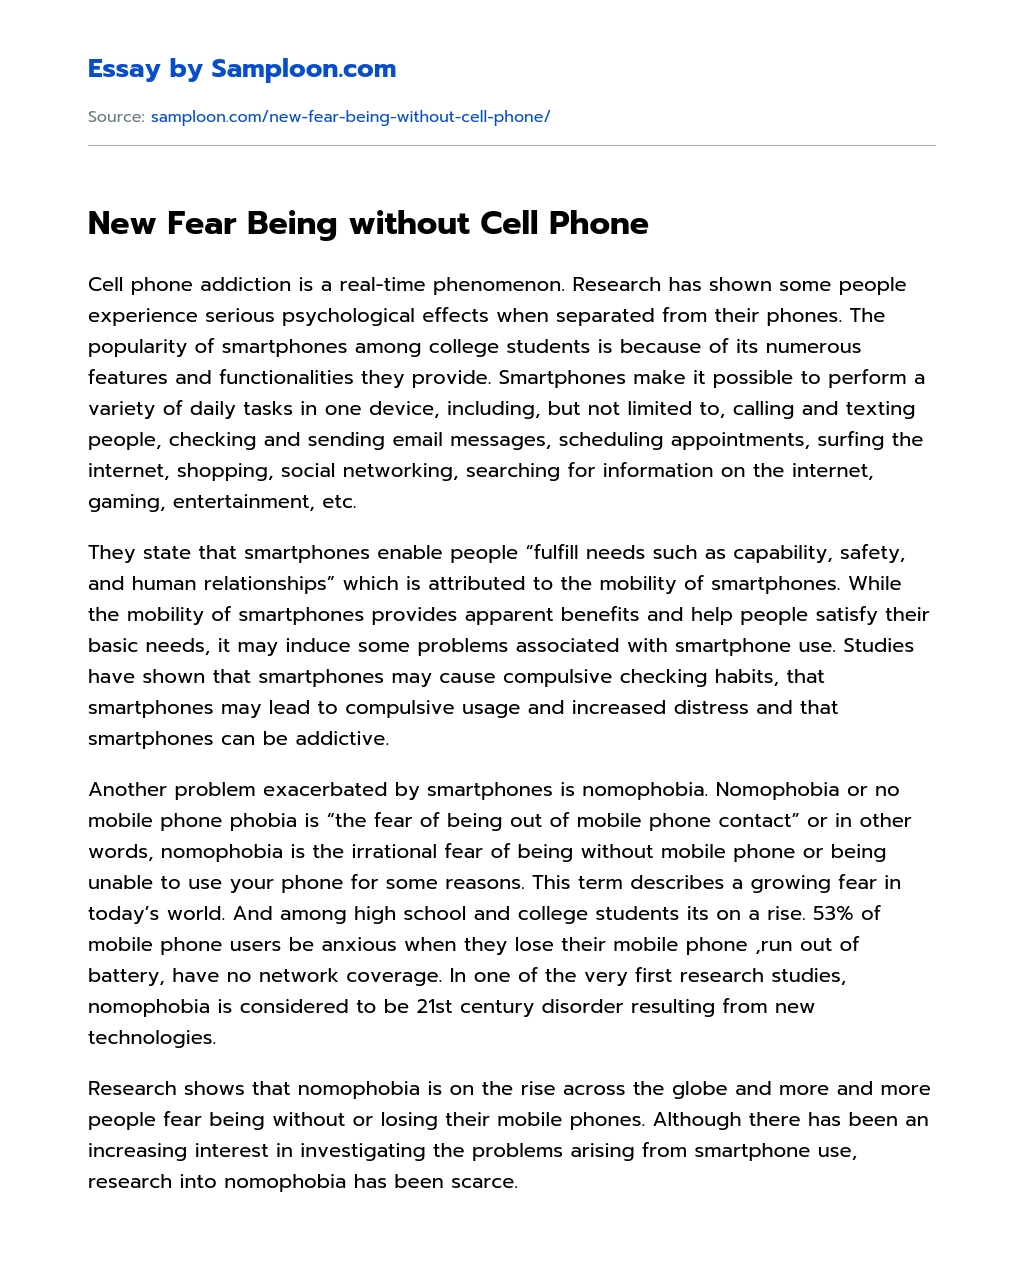 New Fear Being without Cell Phone essay